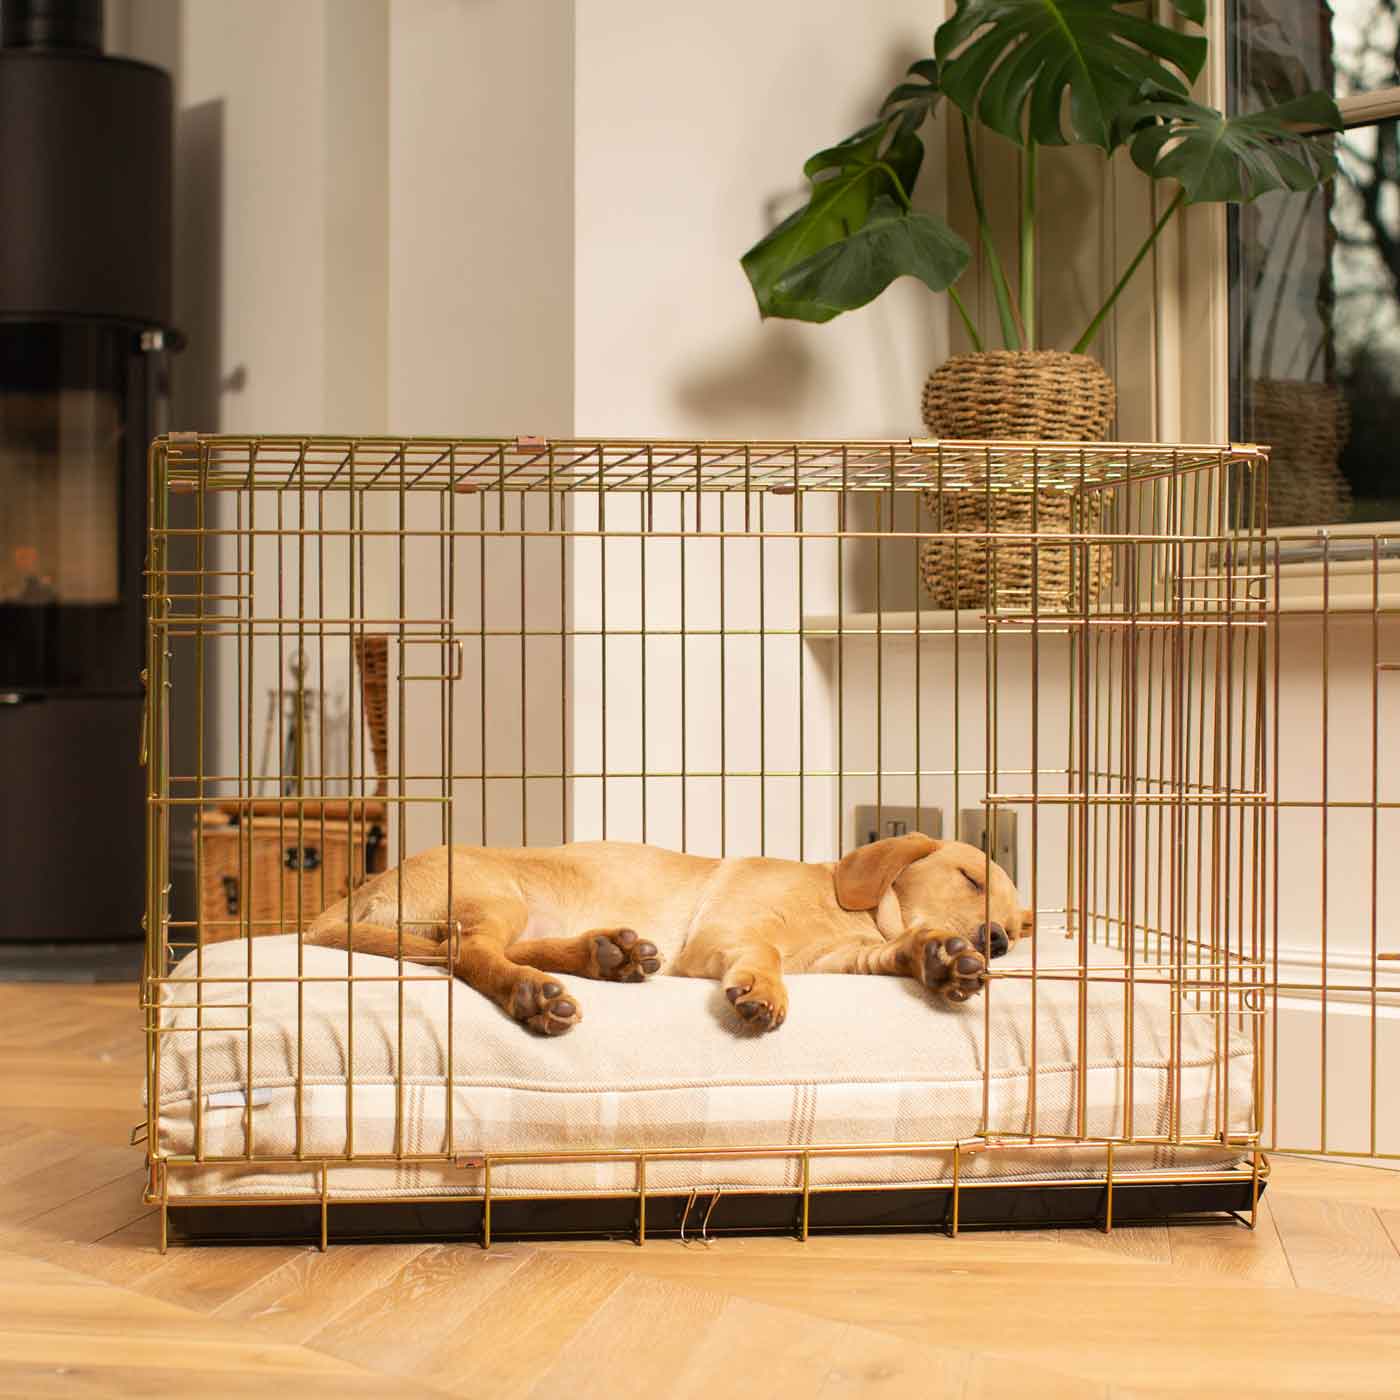 Luxury Gold Dog Cage Set With Cushion, The Perfect Dog Cage For The Ultimate Naptime, Now Available To Personalize at Lords & Labradors US